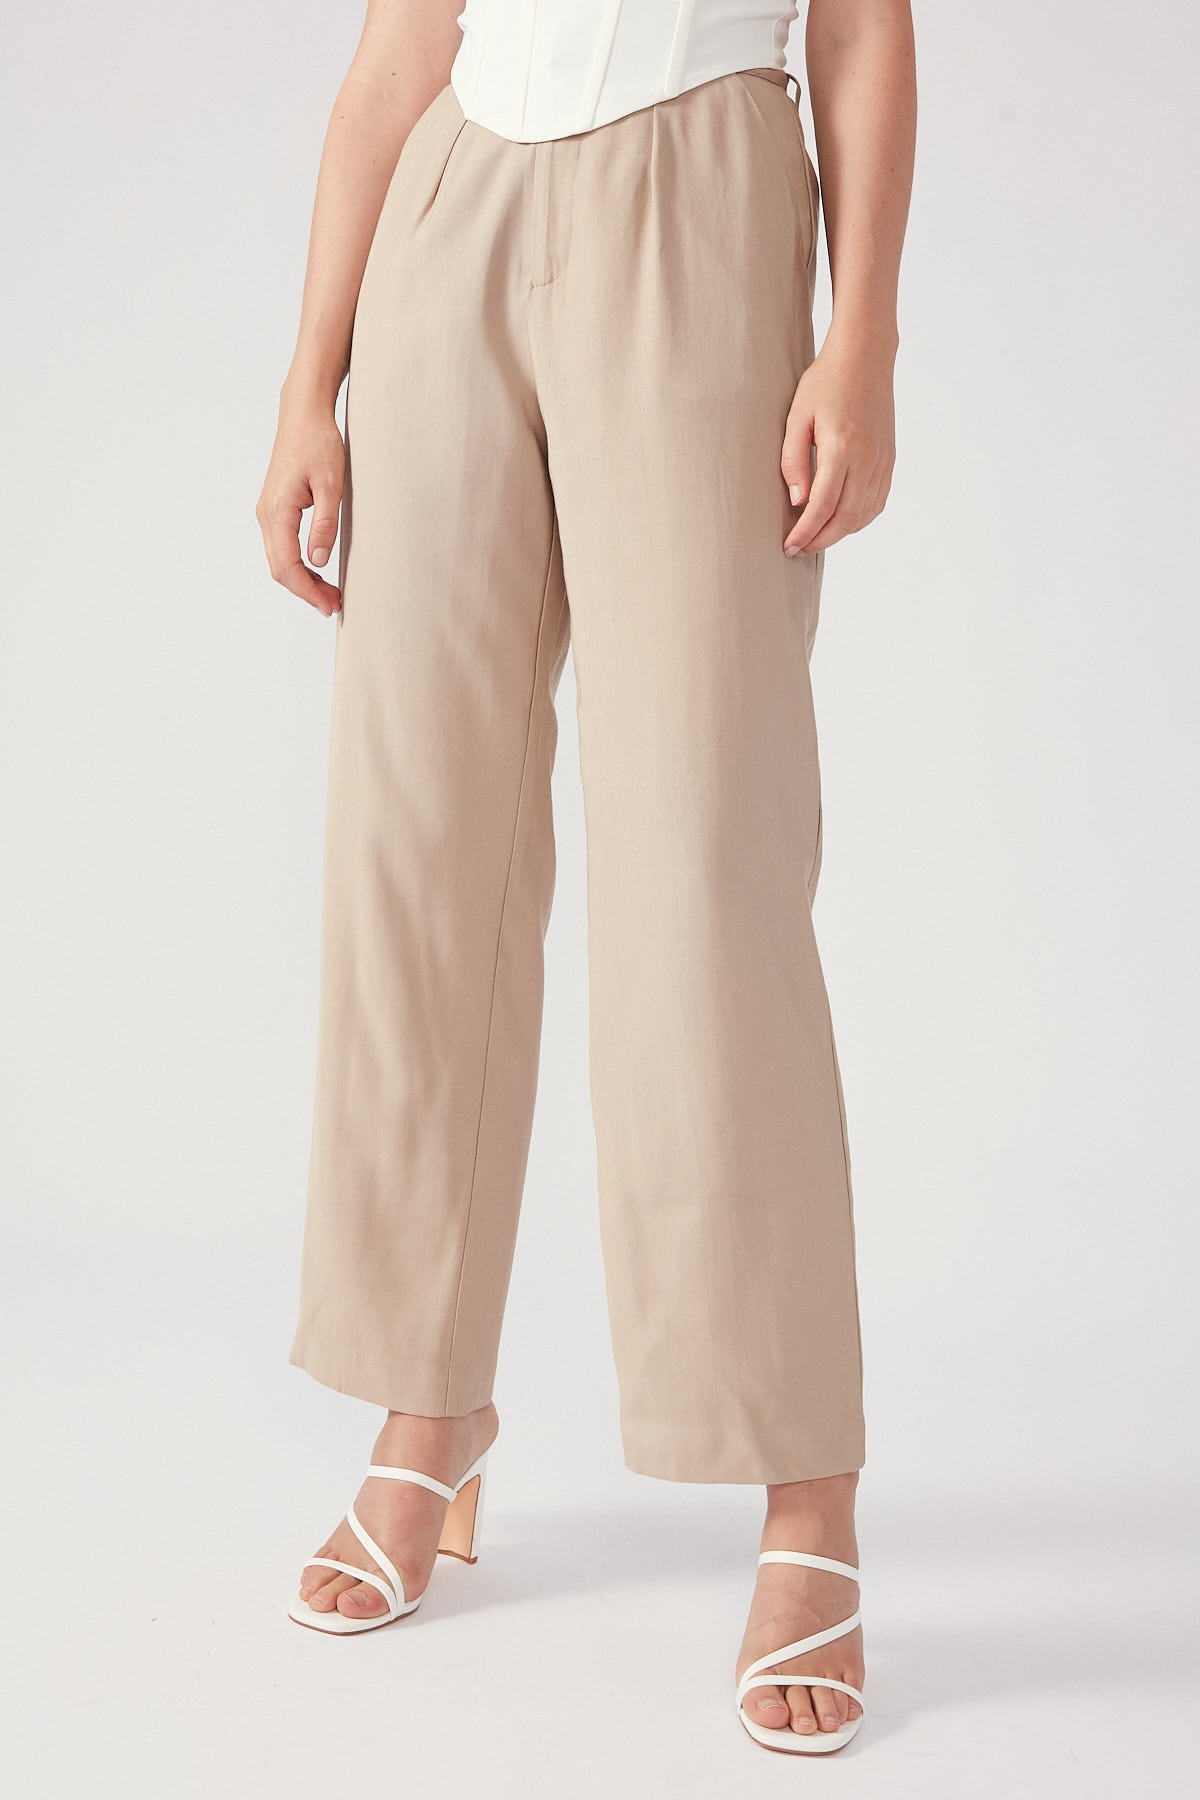 Perfect Stranger Stay With Me Petite Pant Taupe